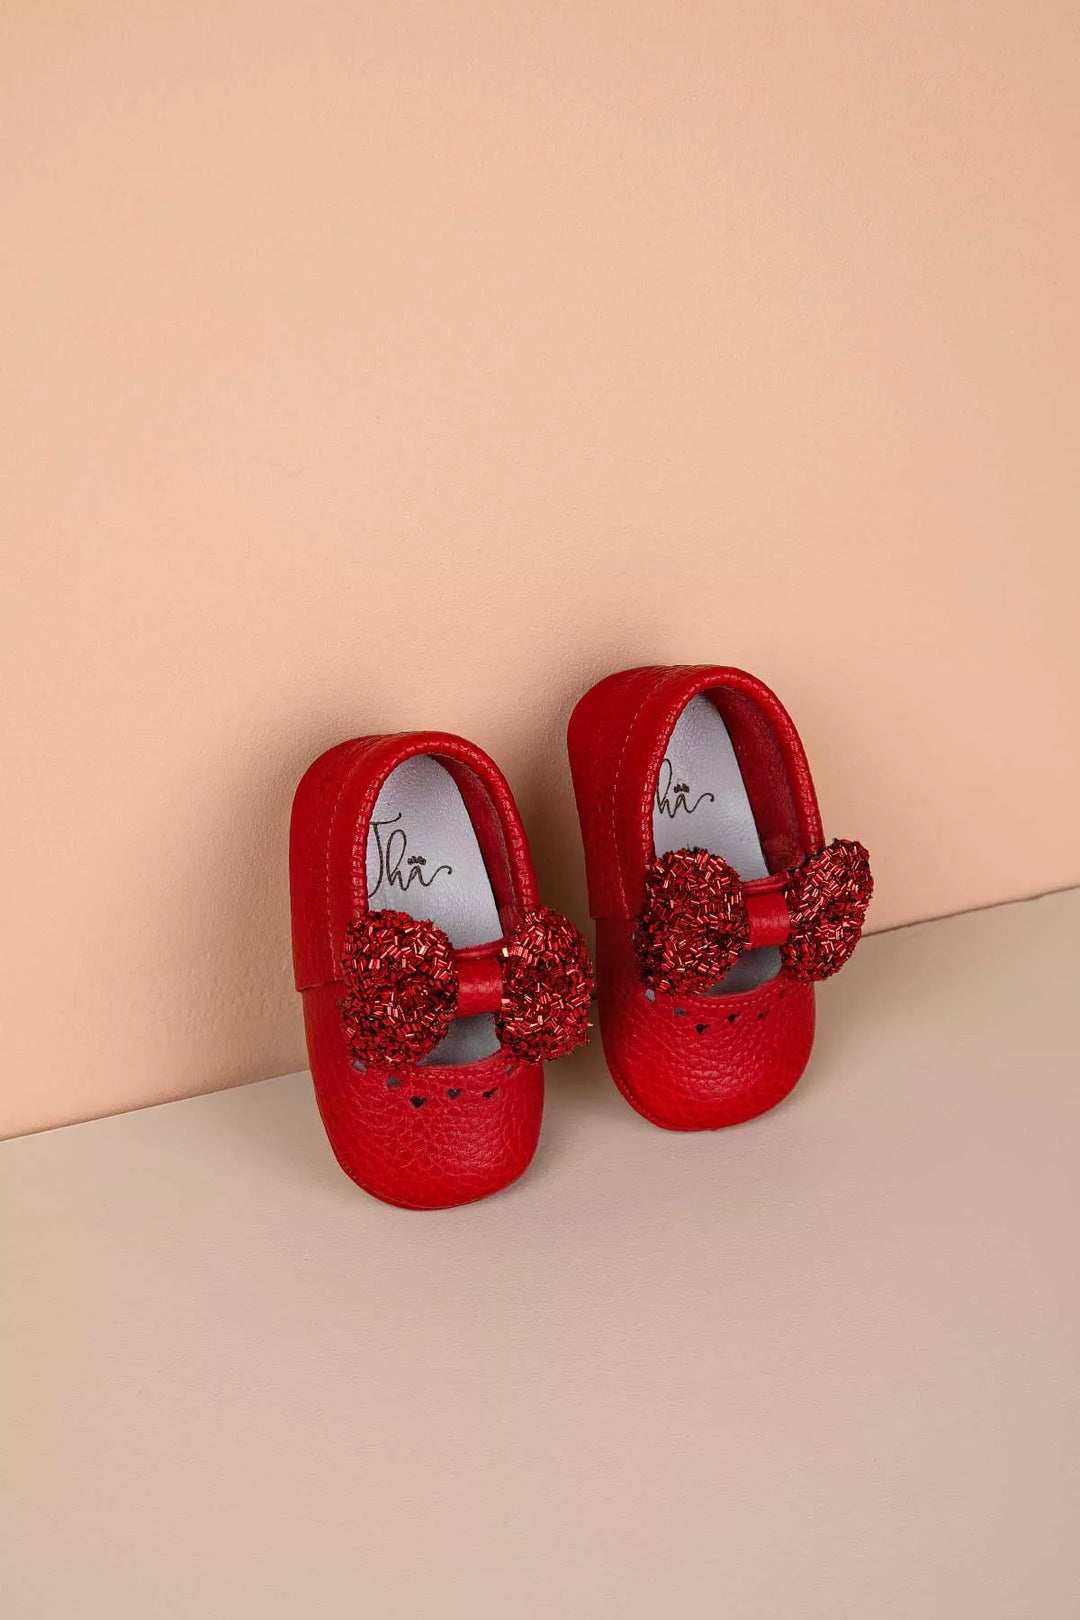 Red baby shoes that have glitter bow tie and heart details